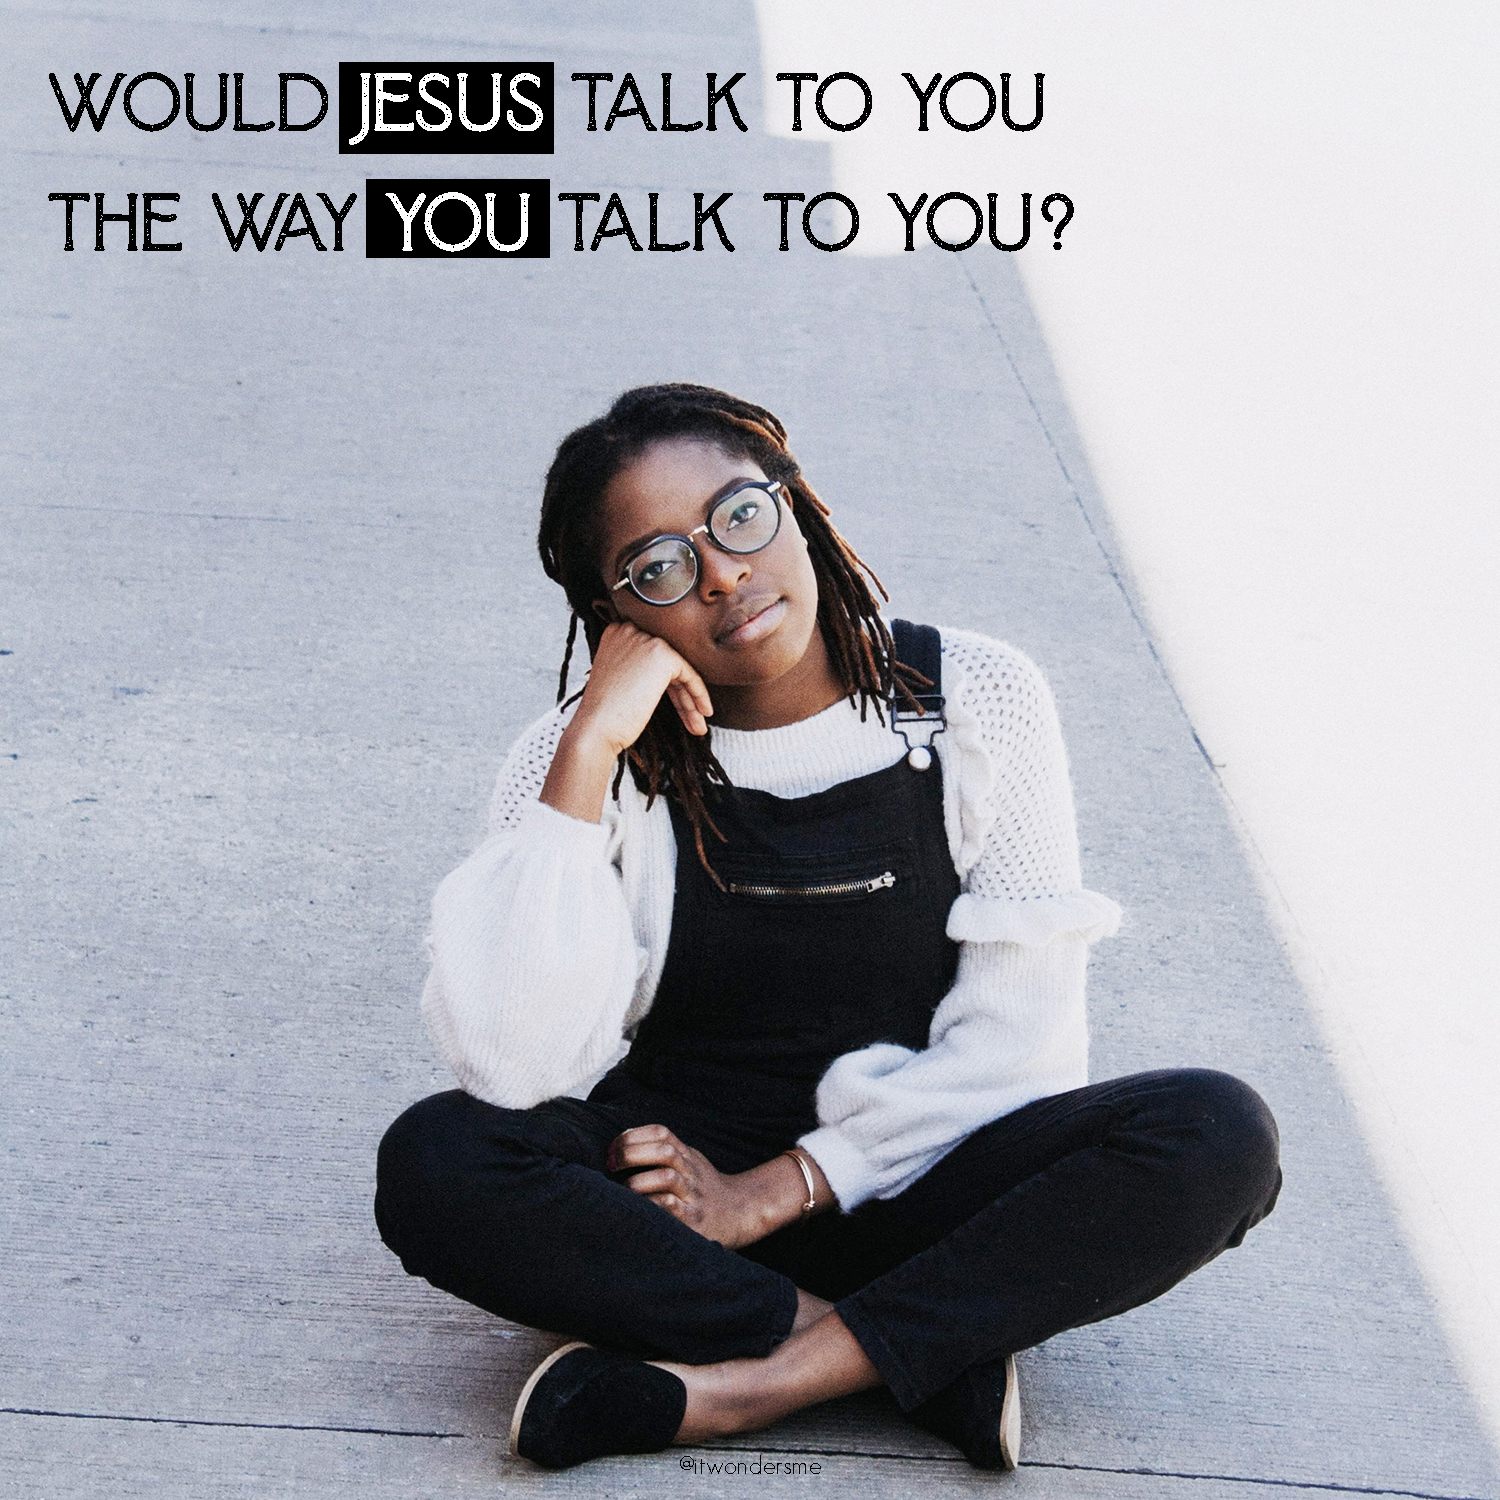 Would Jesus talk to you the way you talk to you?